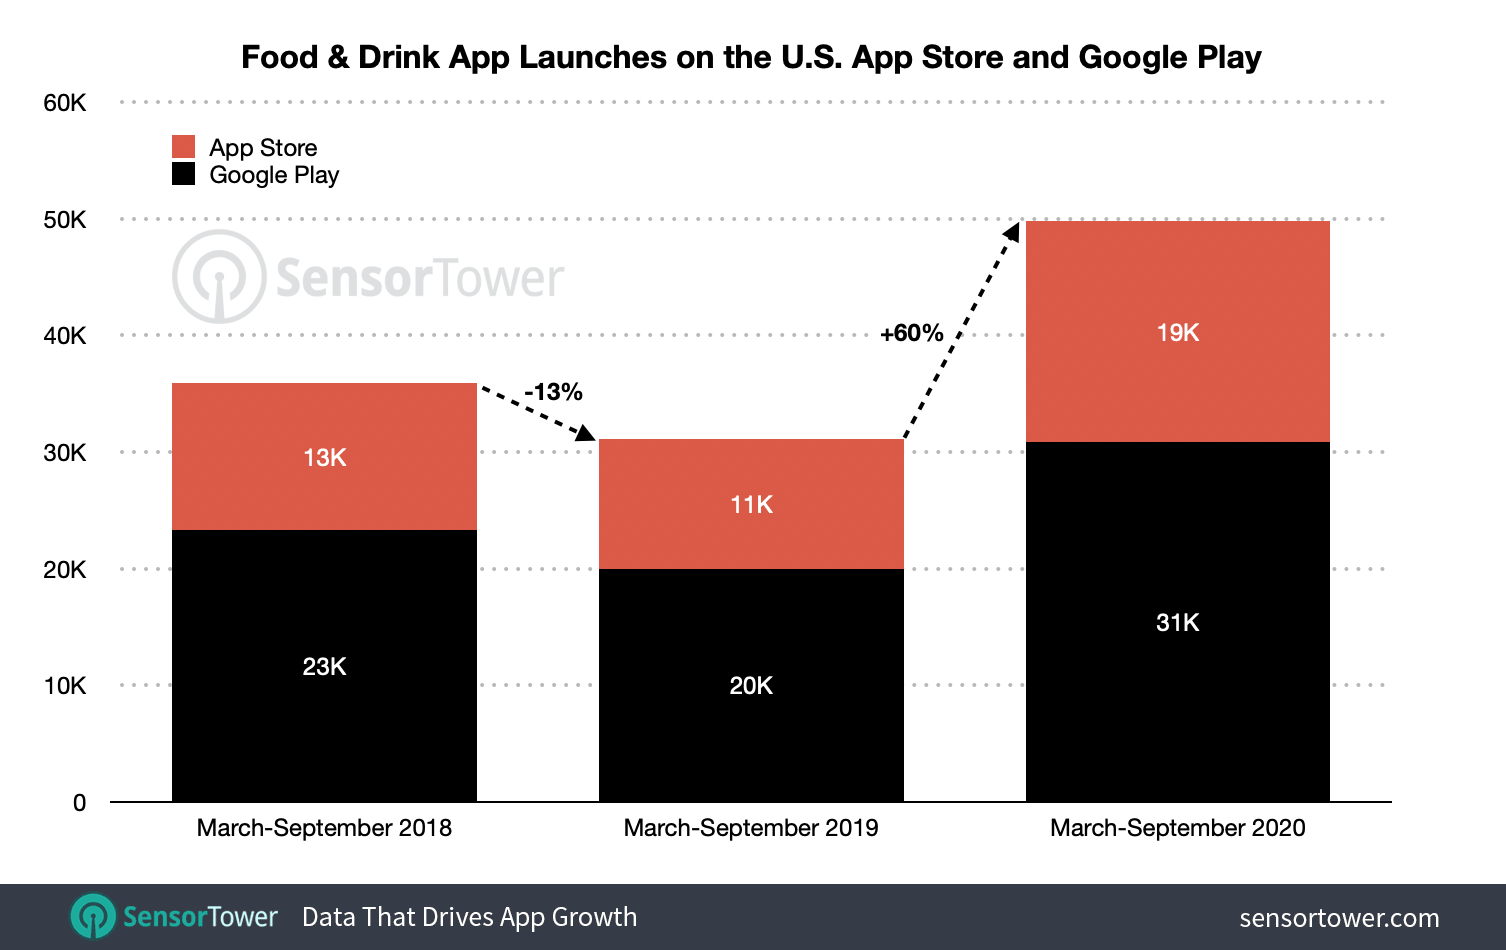 Food & Drink experienced the most growth in terms of new apps launched from March to September 2020